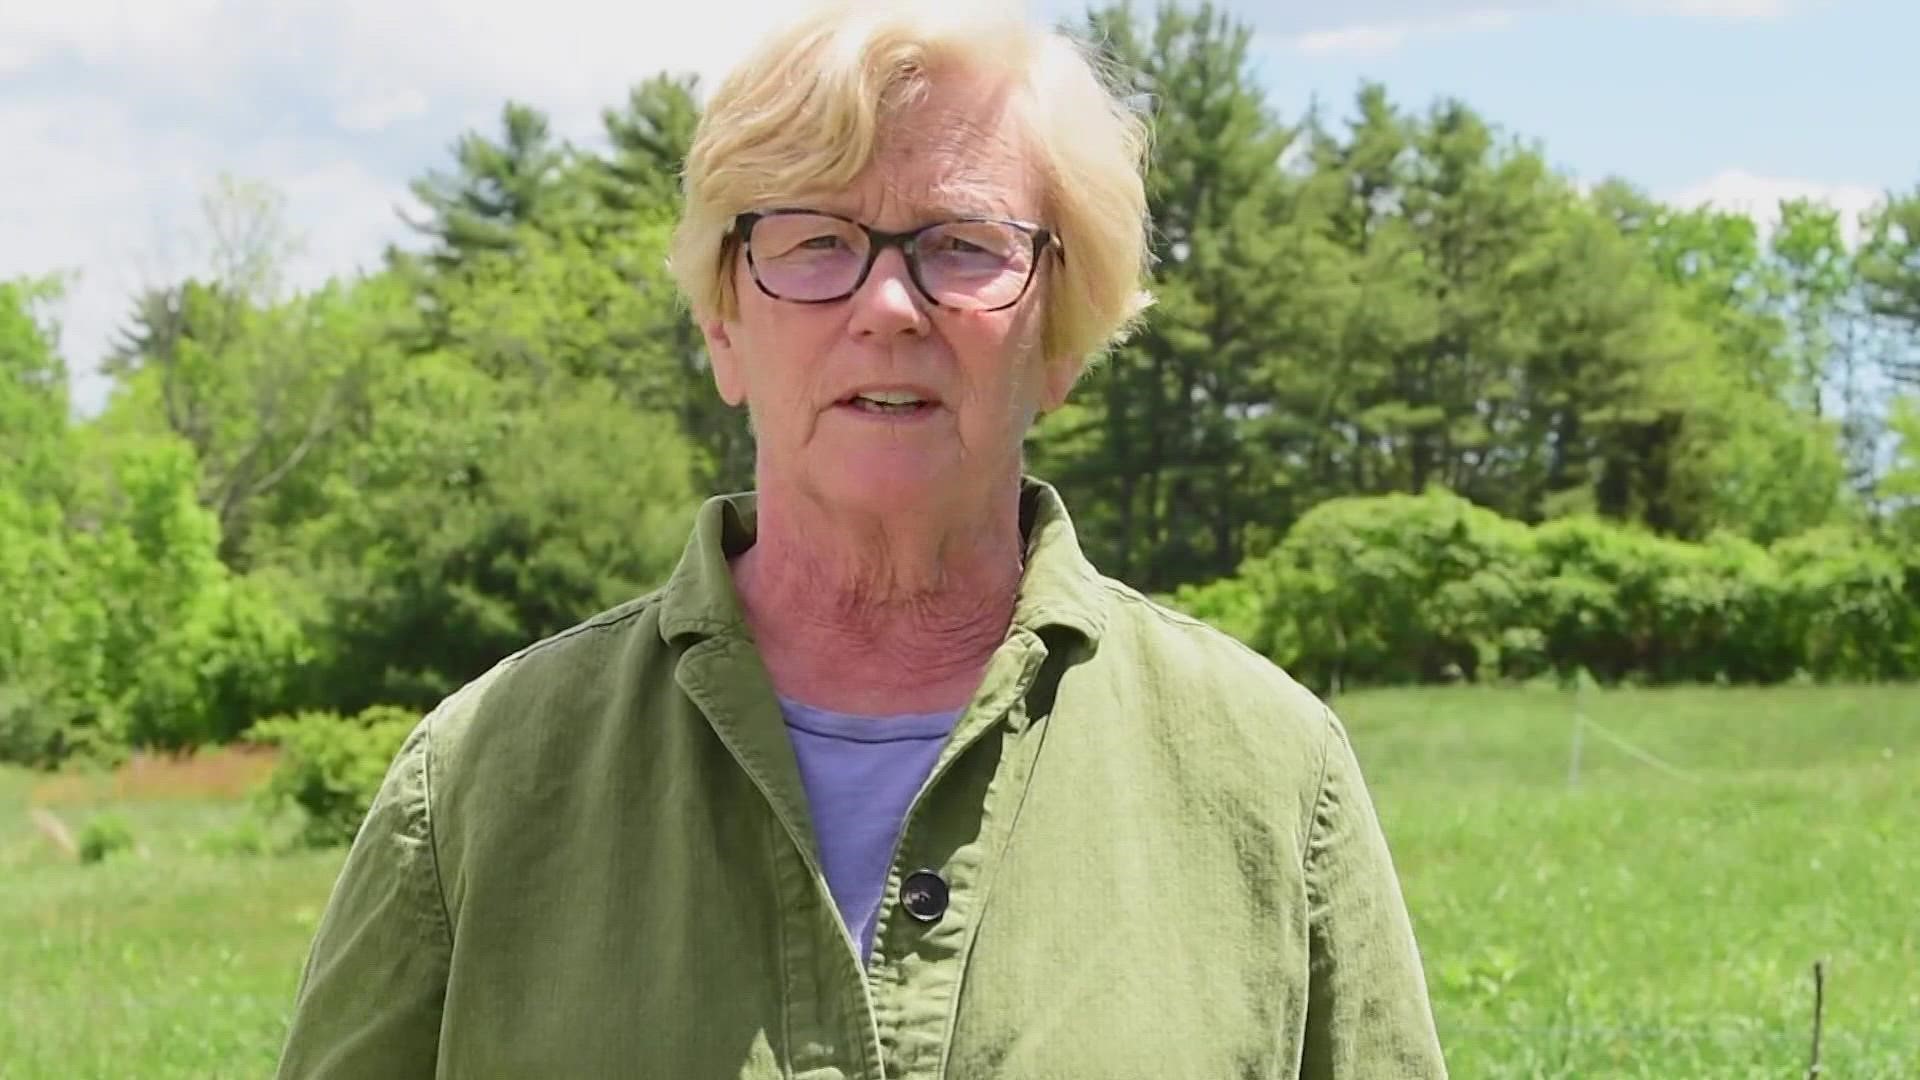 U.S. Rep. Chellie Pingree, D-Maine, shared her COVID-19 news on Tuesday.